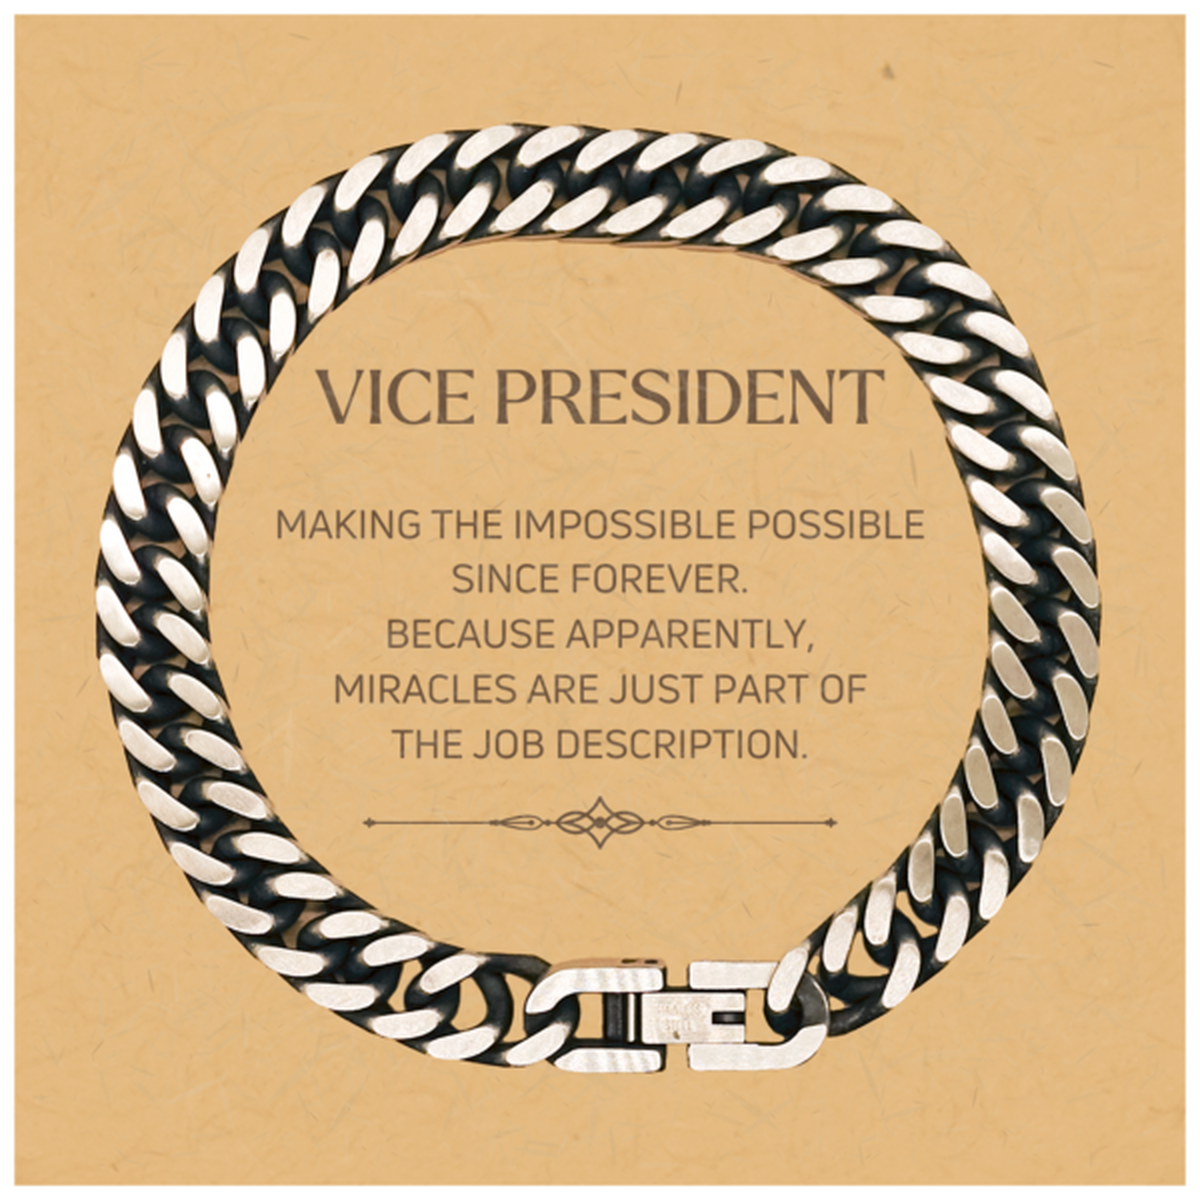 Funny Vice President Gifts, Miracles are just part of the job description, Inspirational Birthday Christmas Cuban Link Chain Bracelet For Vice President, Men, Women, Coworkers, Friends, Boss